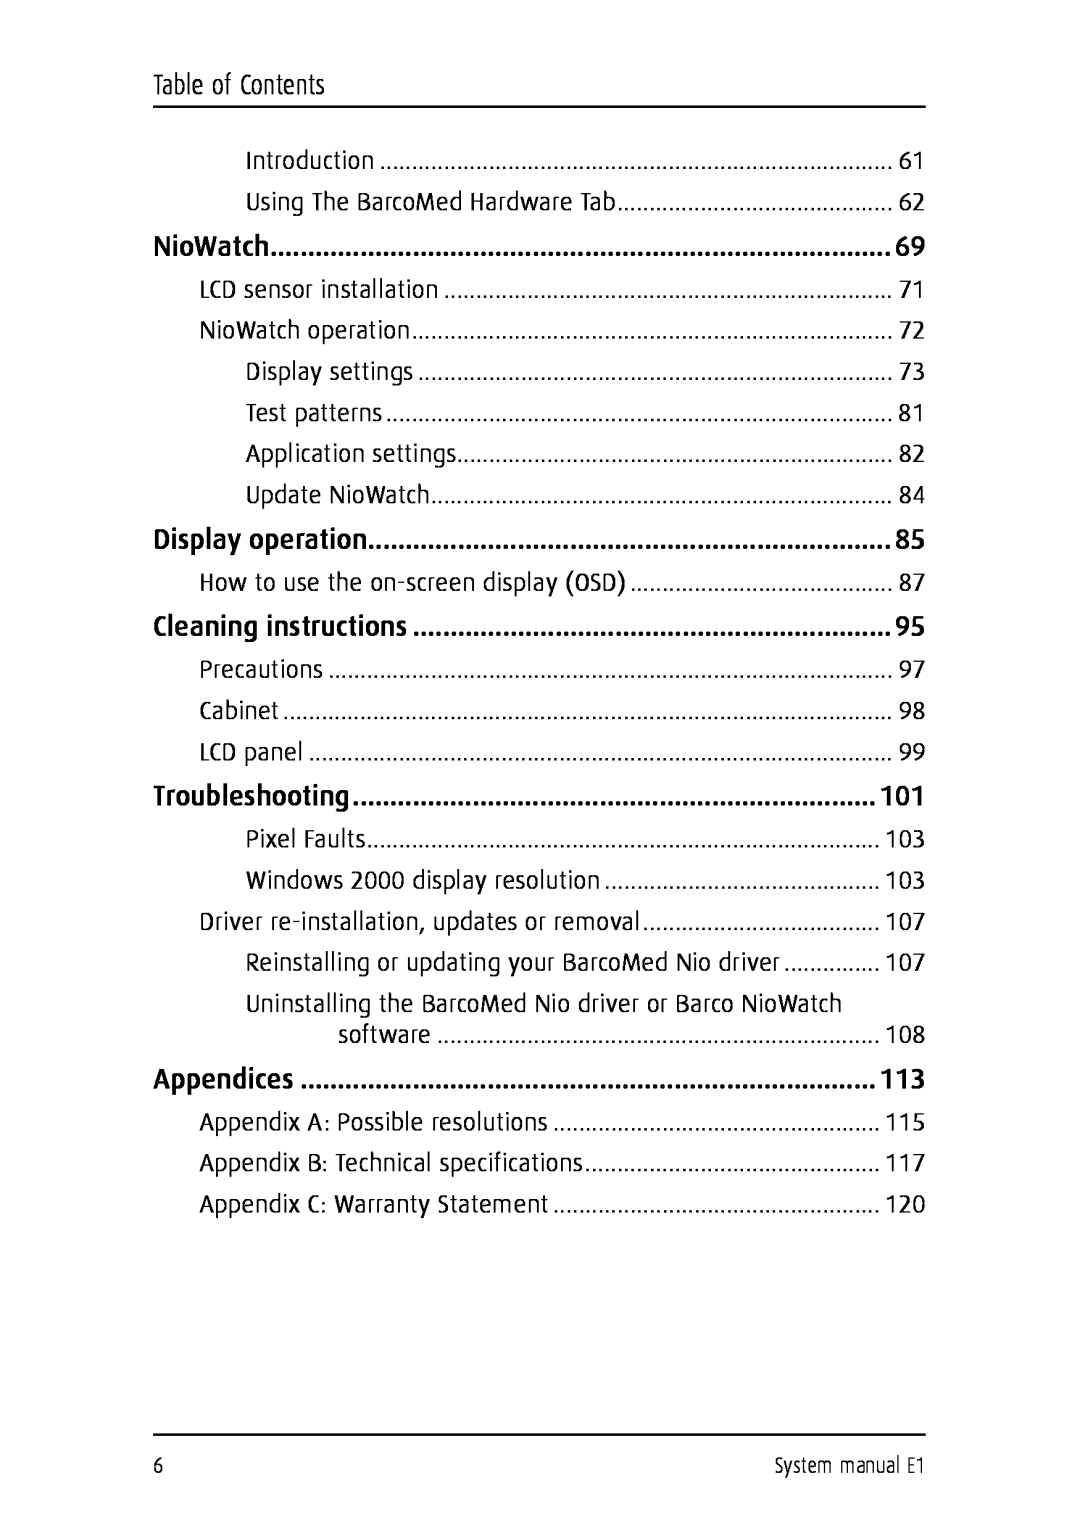 Barco E1 manual Table of Contents 